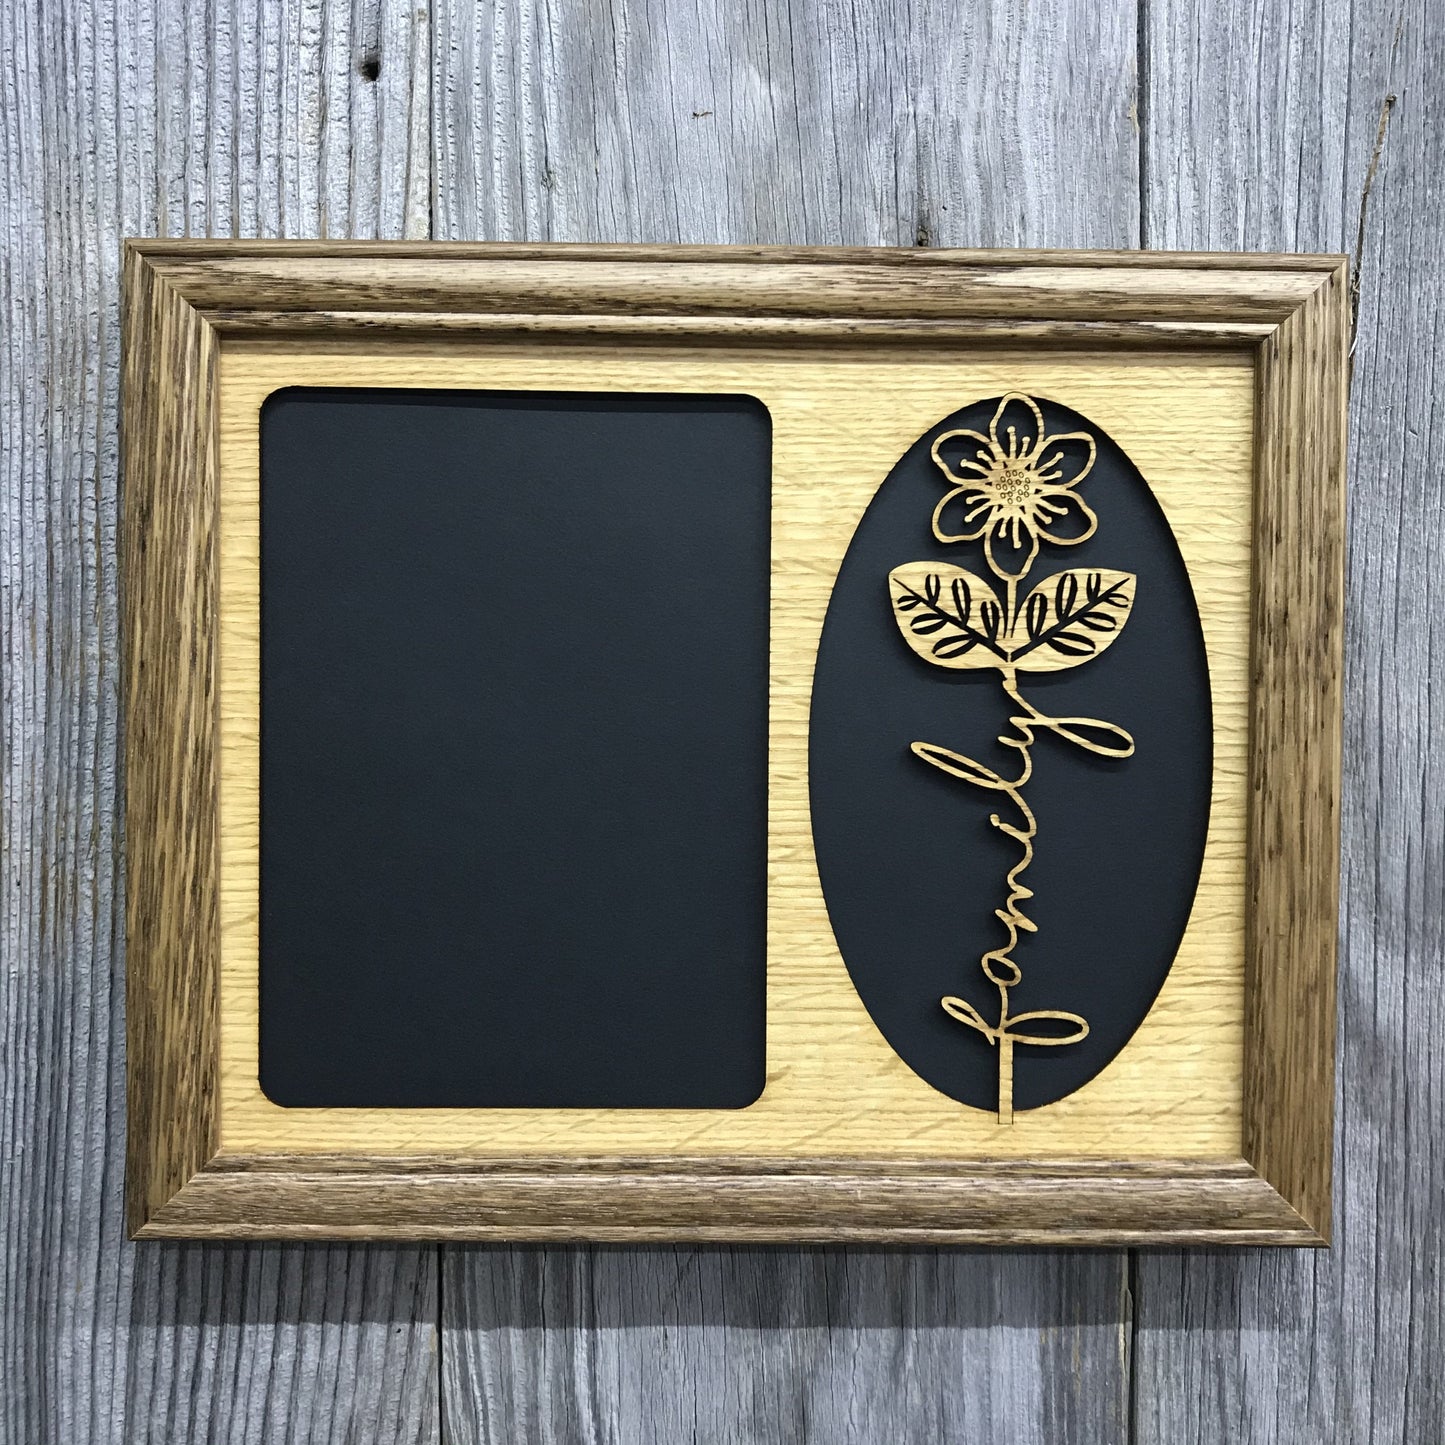 Word Flower Picture Frame - 8x10 Frame Holds 5x7 Photo